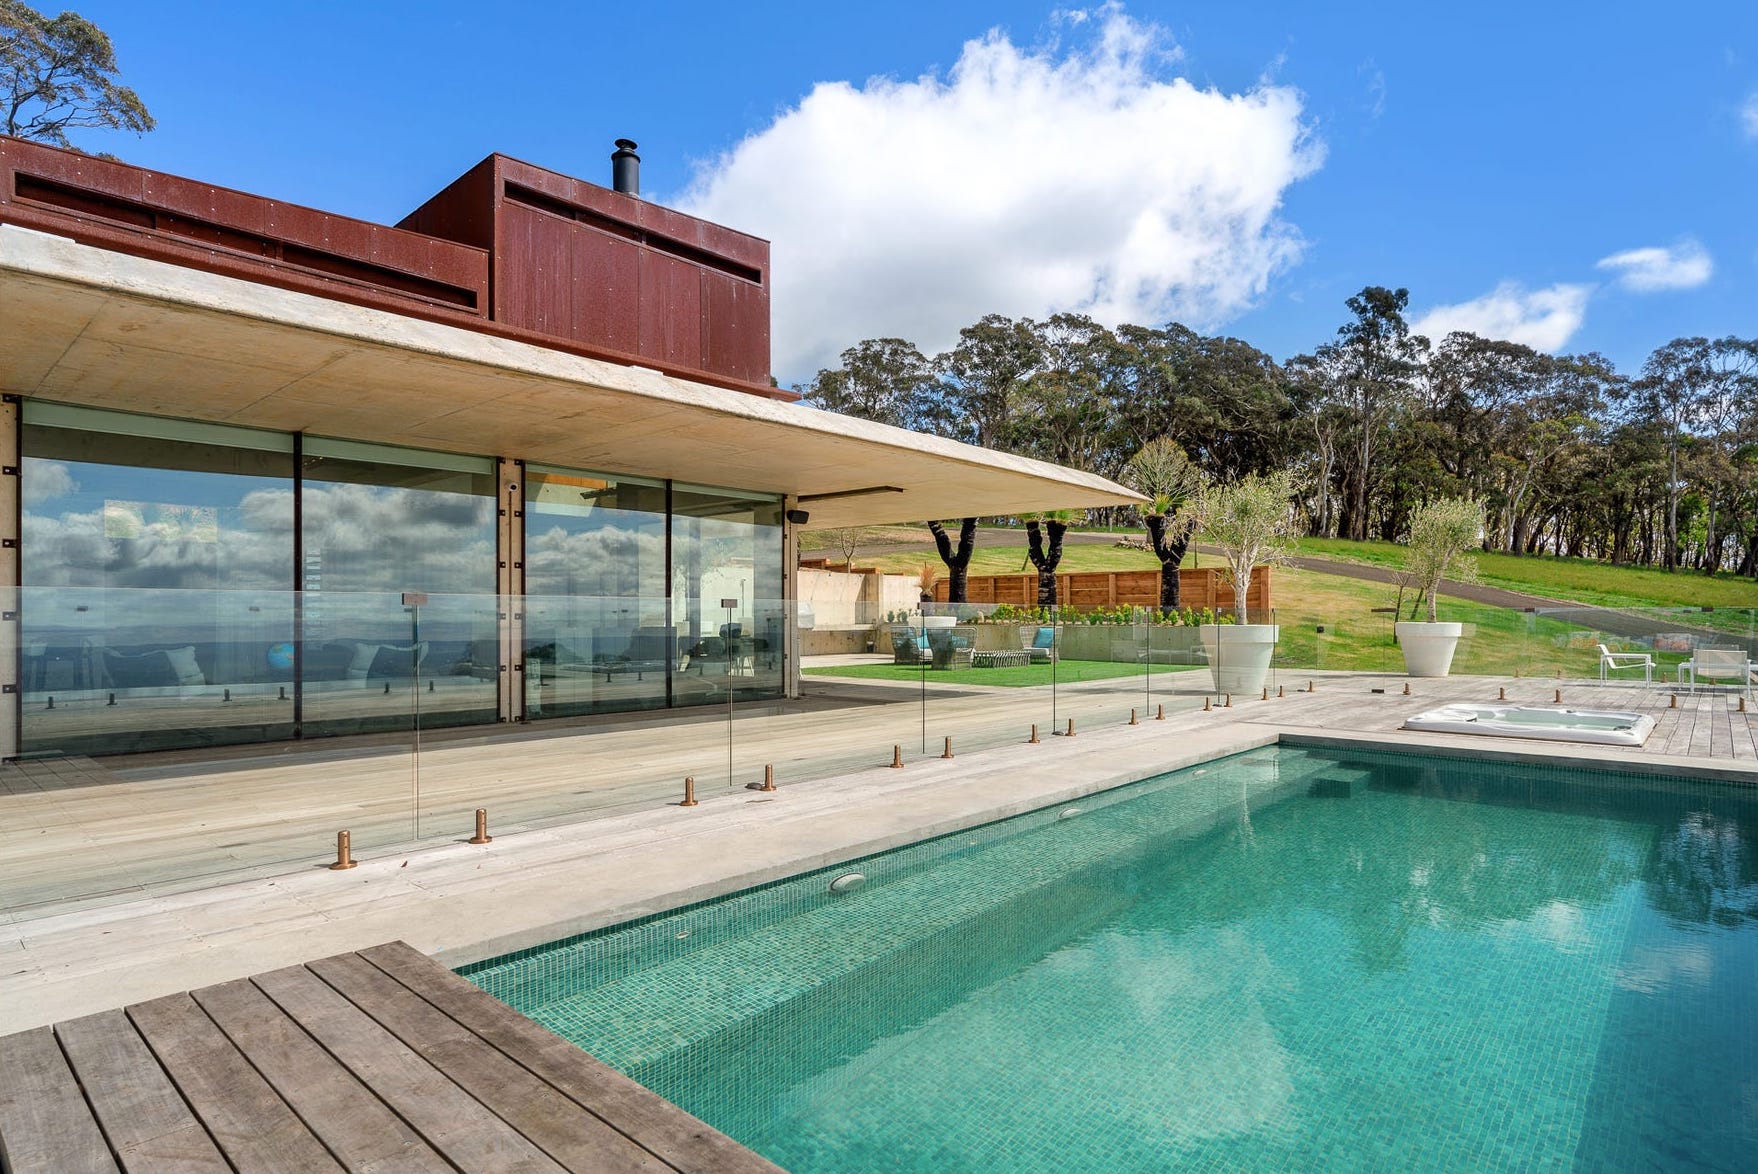 Best pool location near Sydney for photoshoots, film location, corporate event space